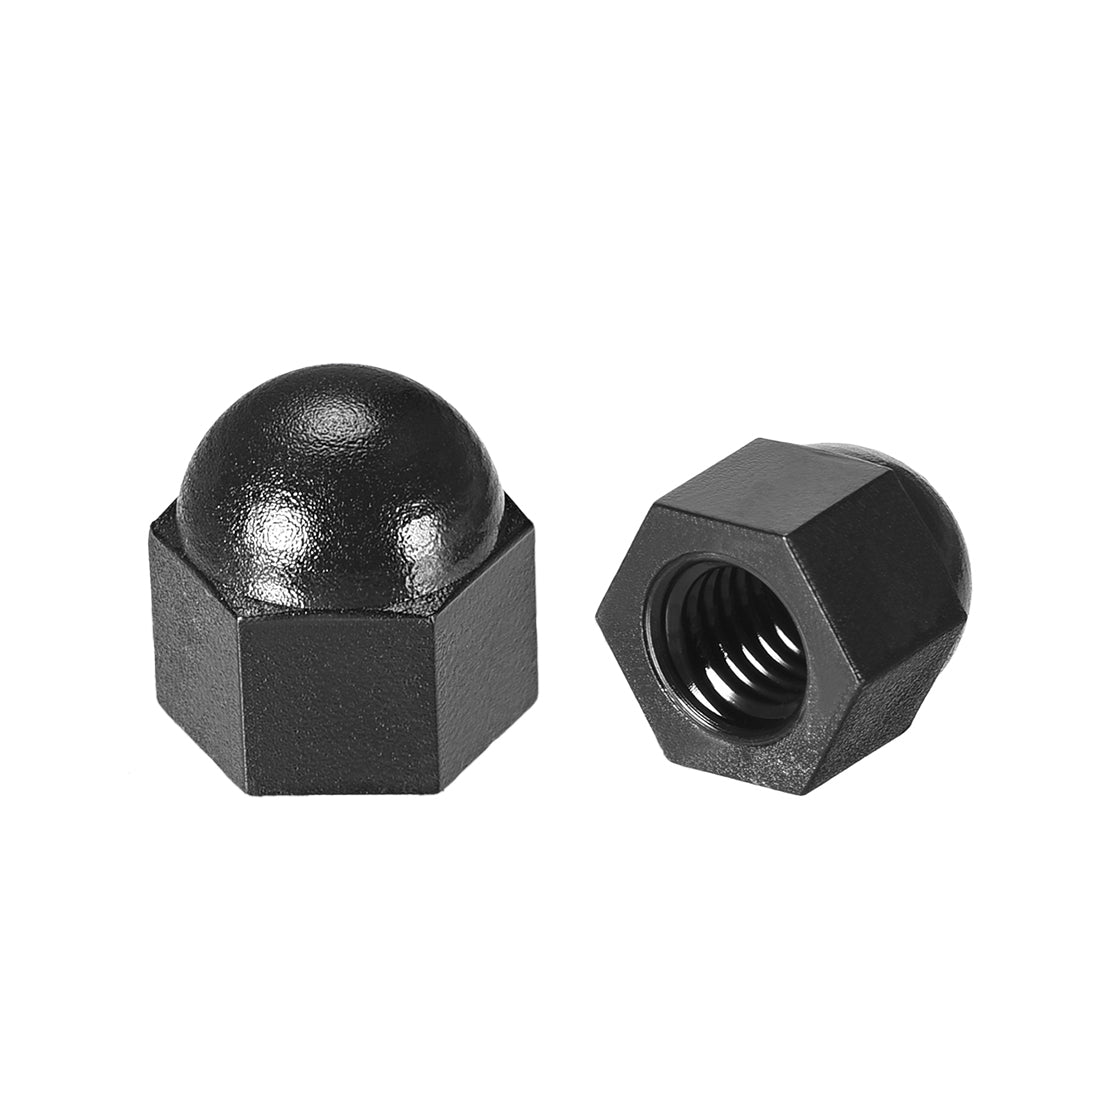 uxcell Uxcell M6 Cap Nut, Hex Acorn Dome Head Nuts for Screws Bolts Nylon Black 10 Pcs